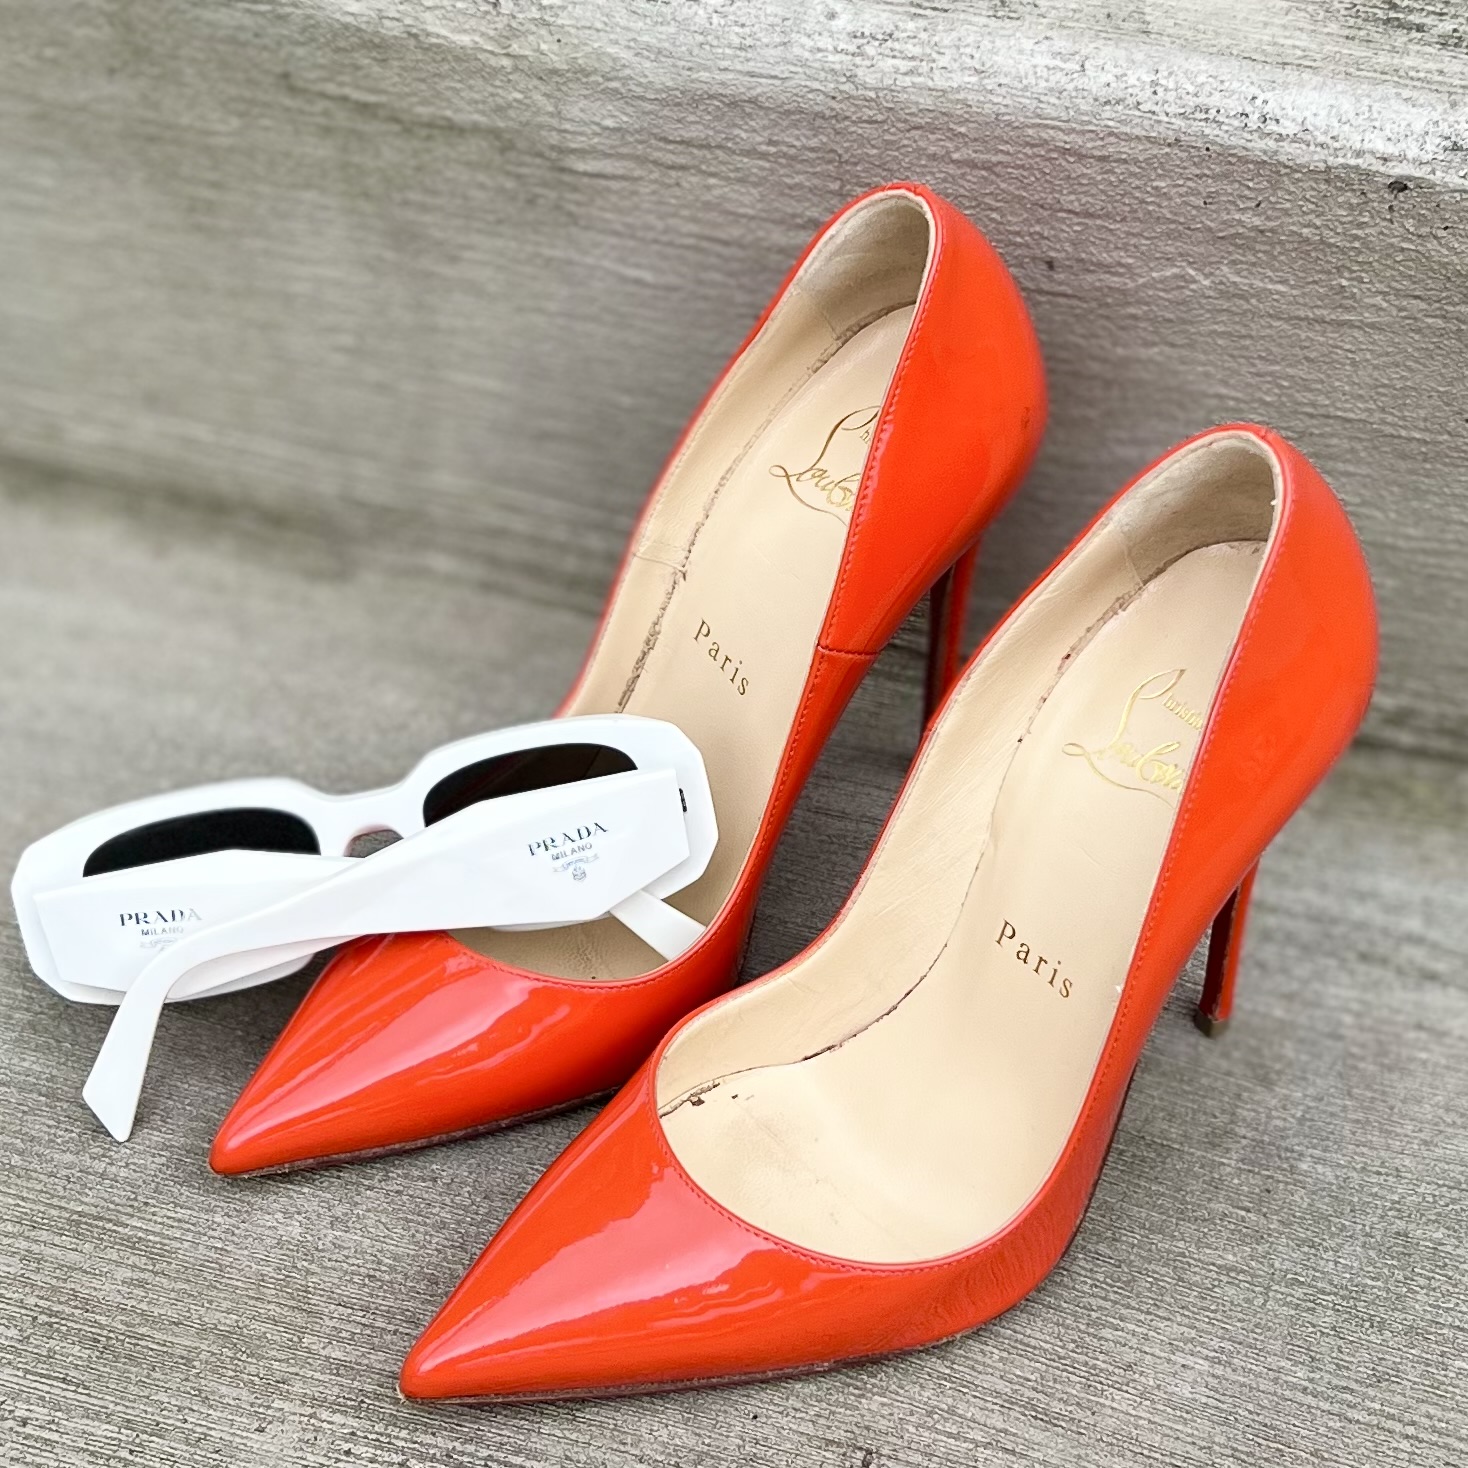 CHRISTIAN LOUBOUTIN Patent So Kate Pumps in Fire Coral (36.5) - More Than  You Can Imagine